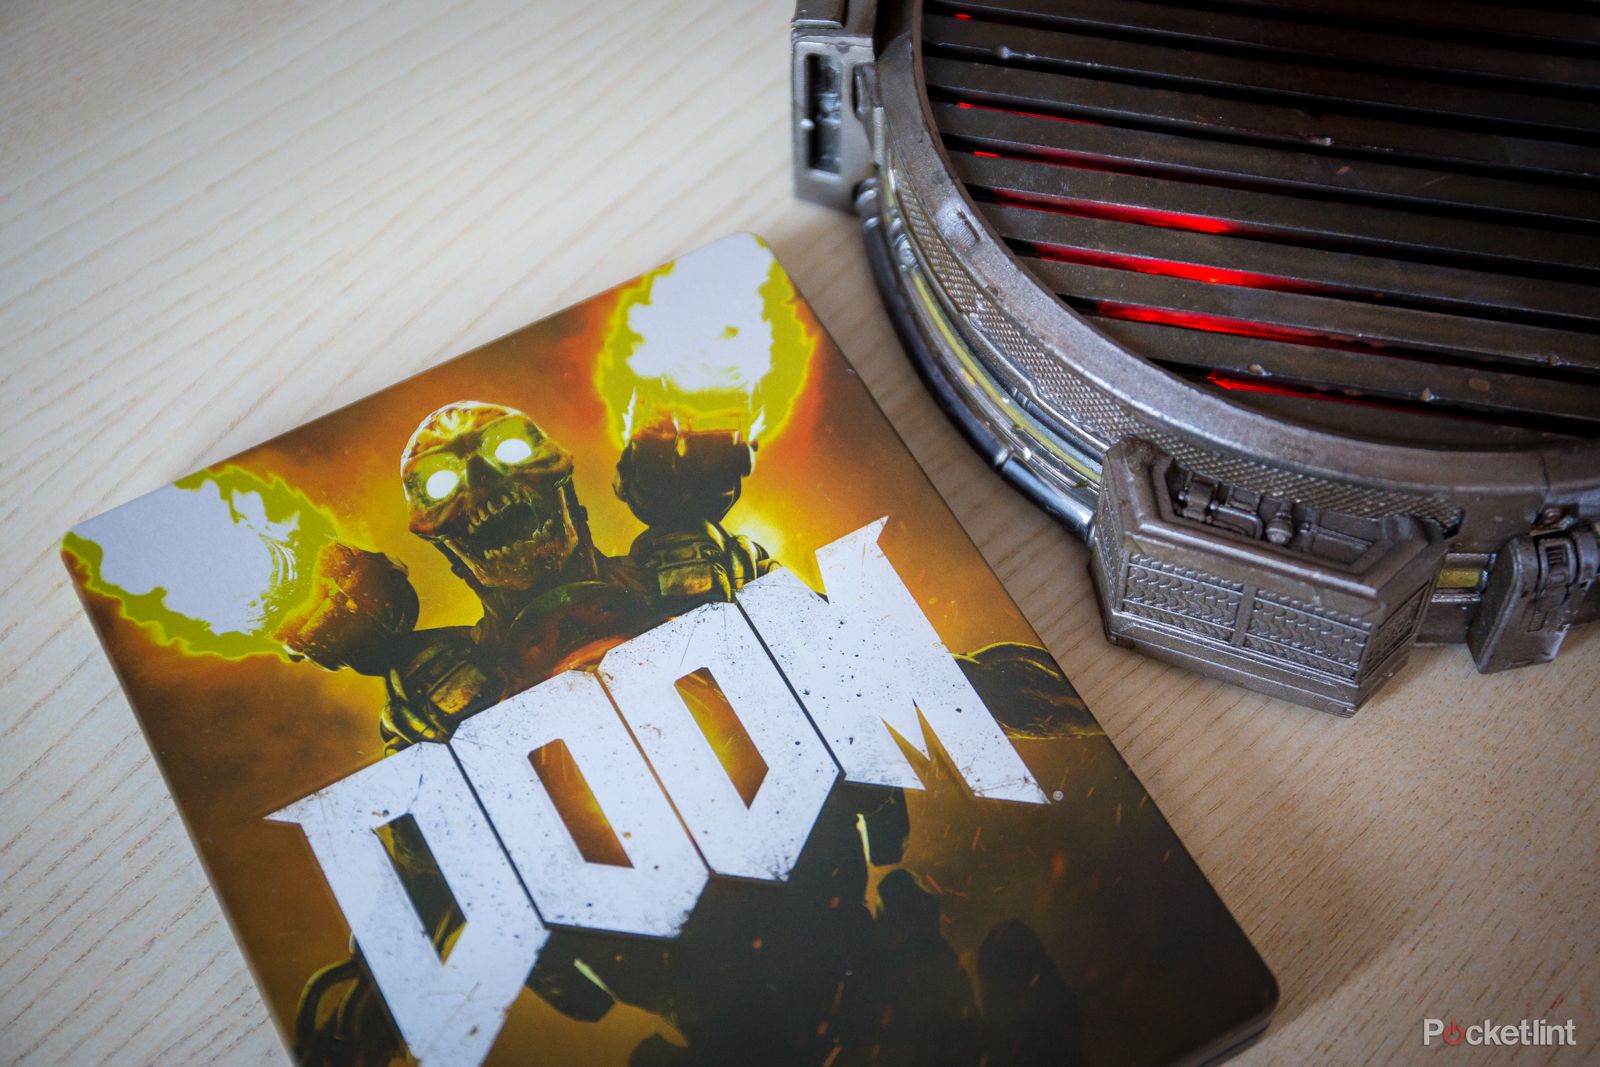 doom collector s edition in pictures see what you get for 100 image 1